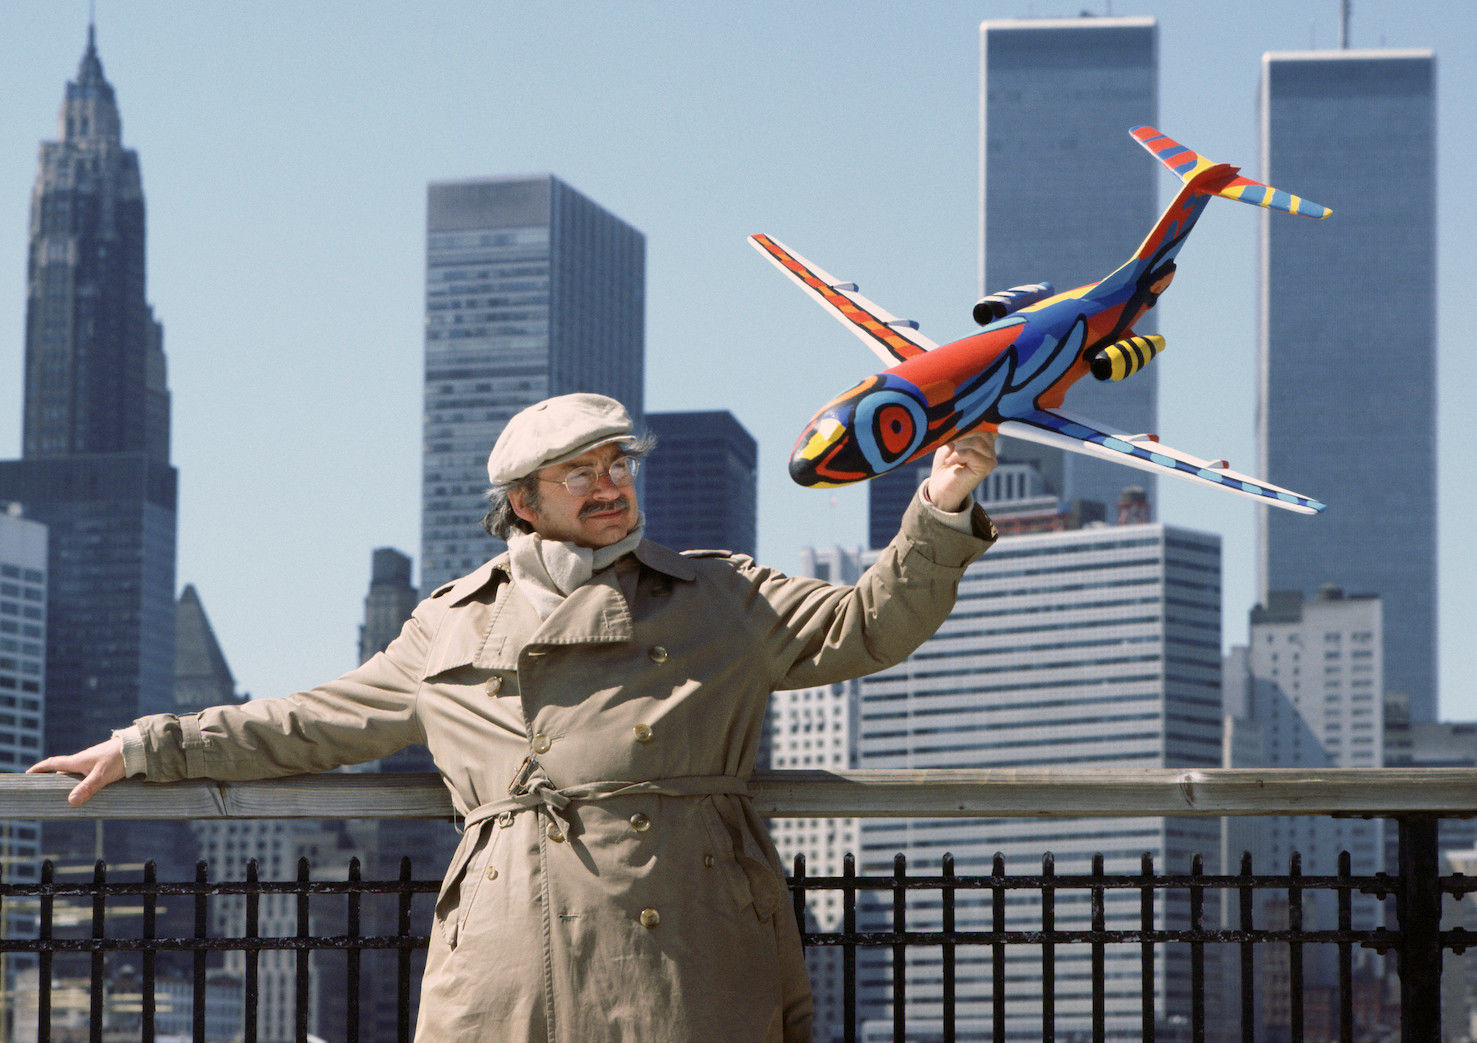 Karel Appel with a Fokker-100 in front of the former WTC building.